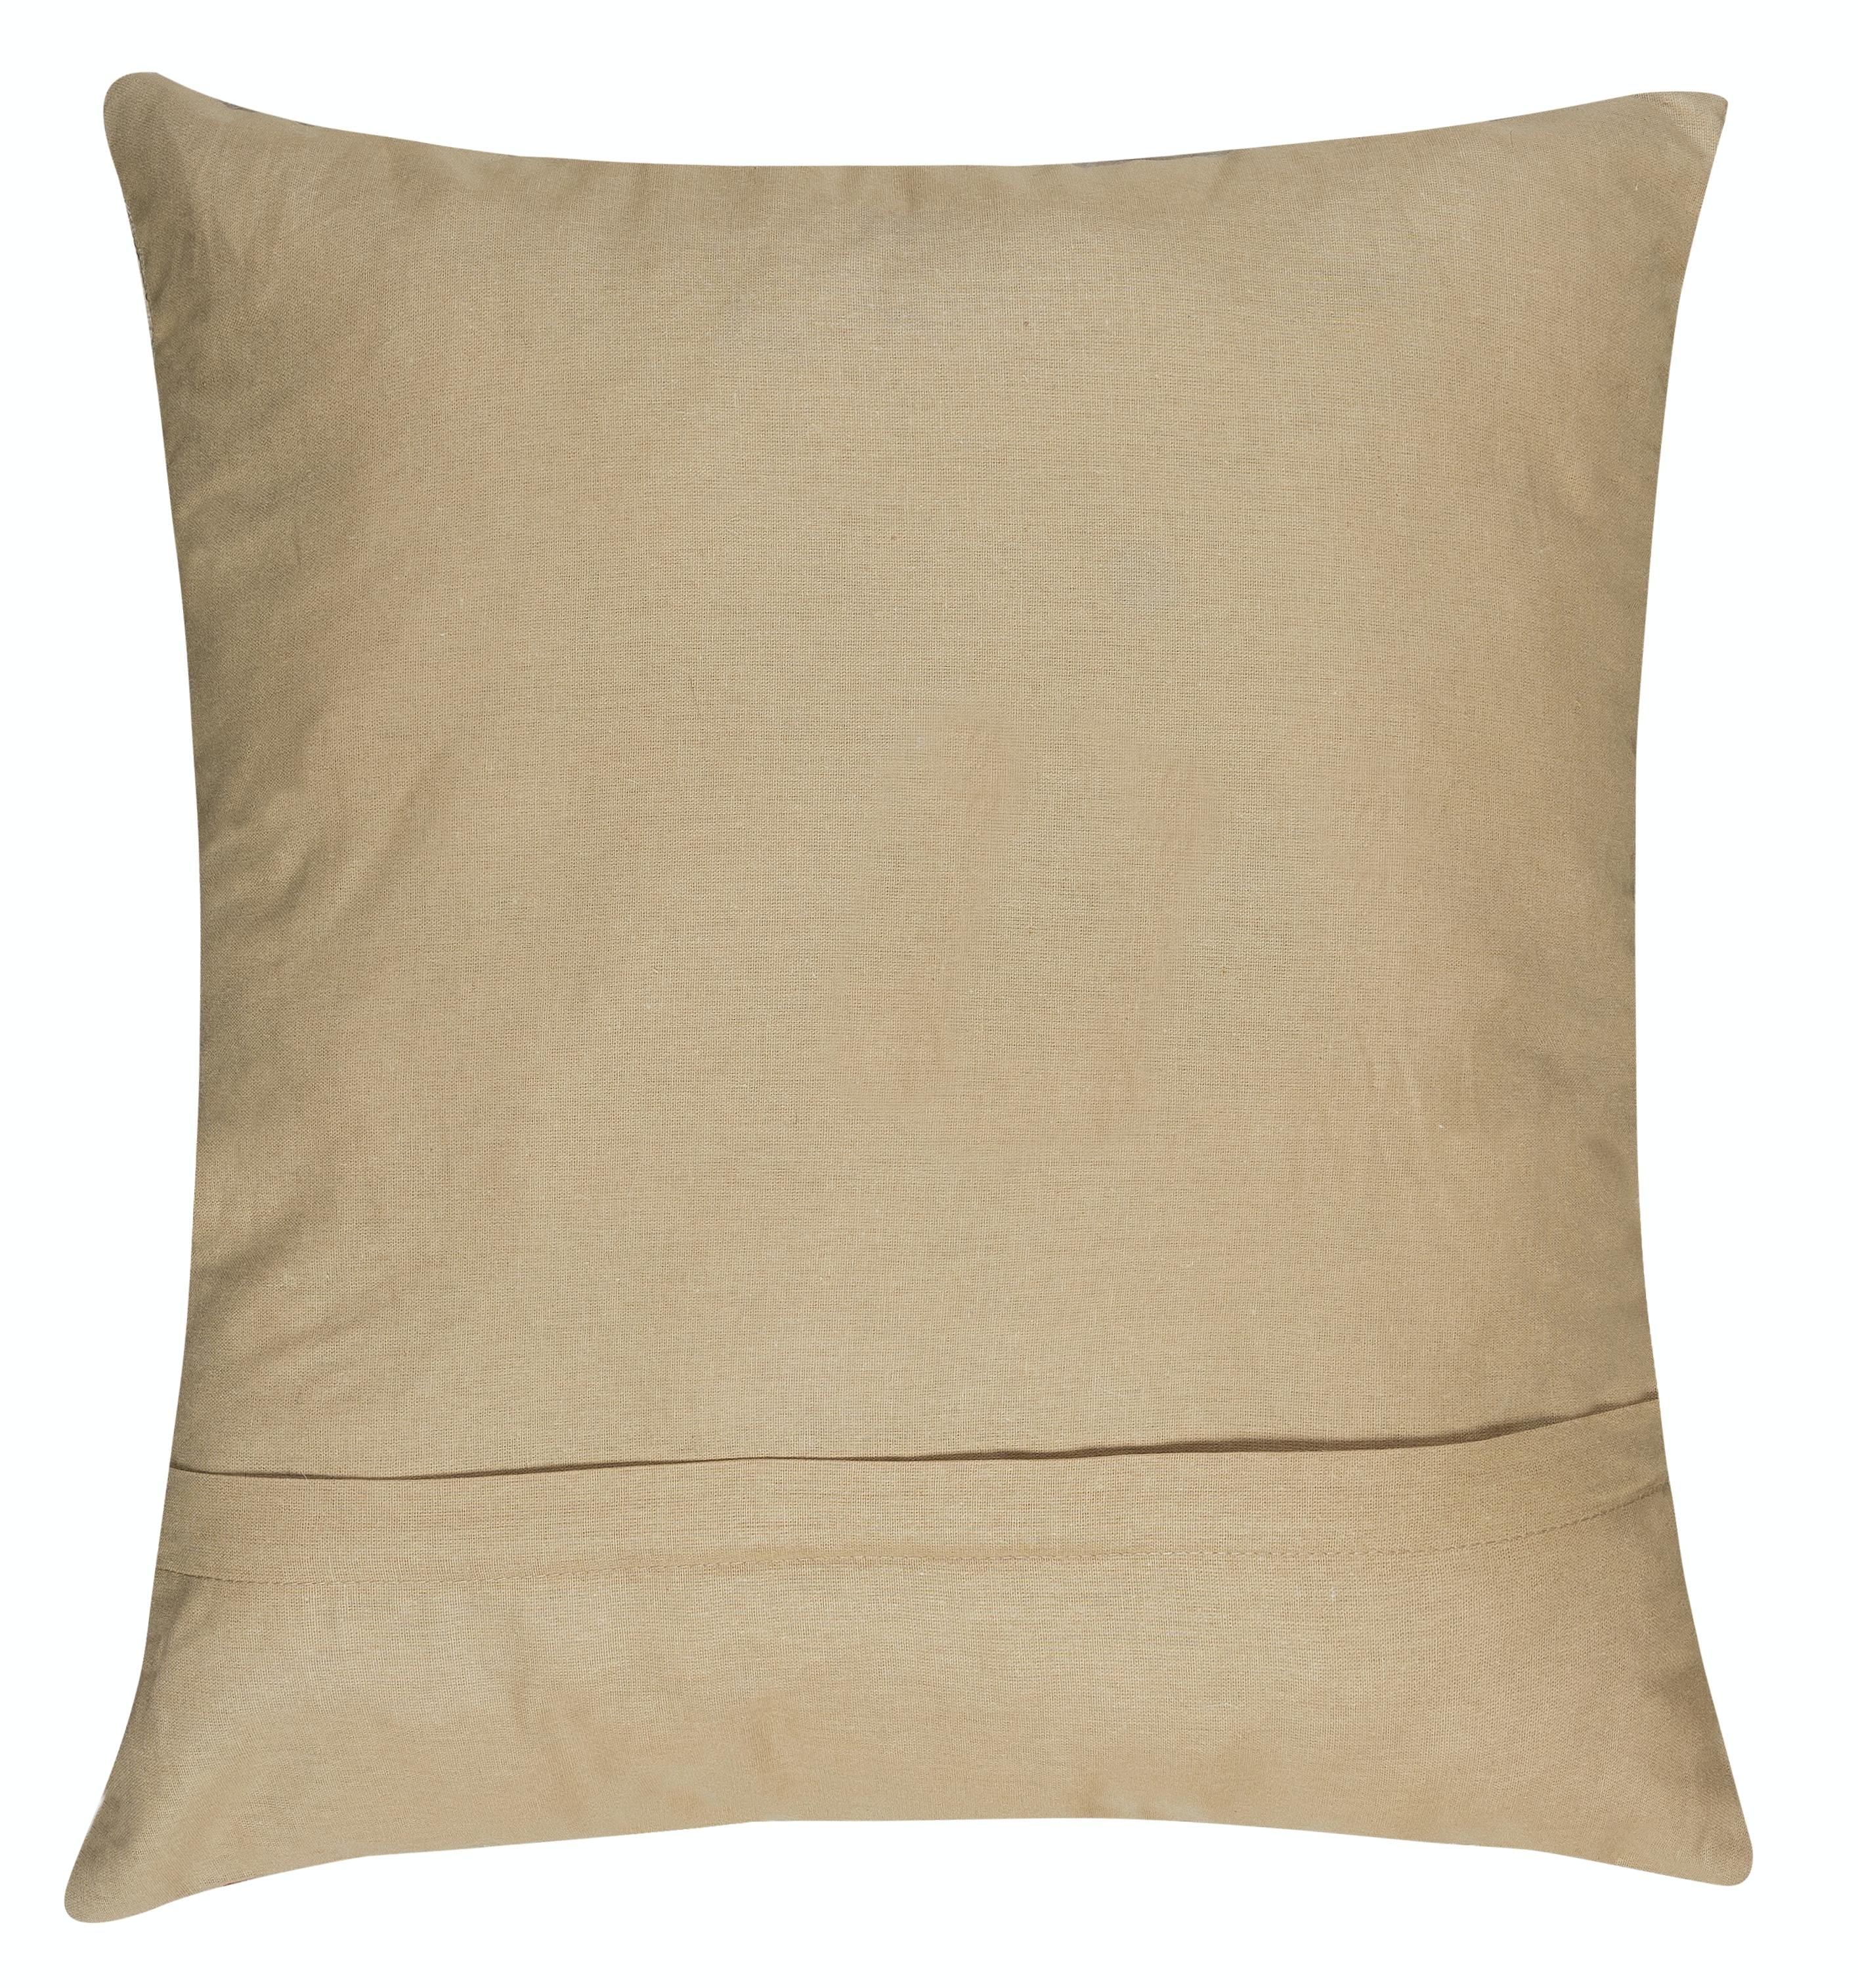 Hand Embroidered 100% Silk Cushion Cover, Suzani Accent Throw Pillow, 18